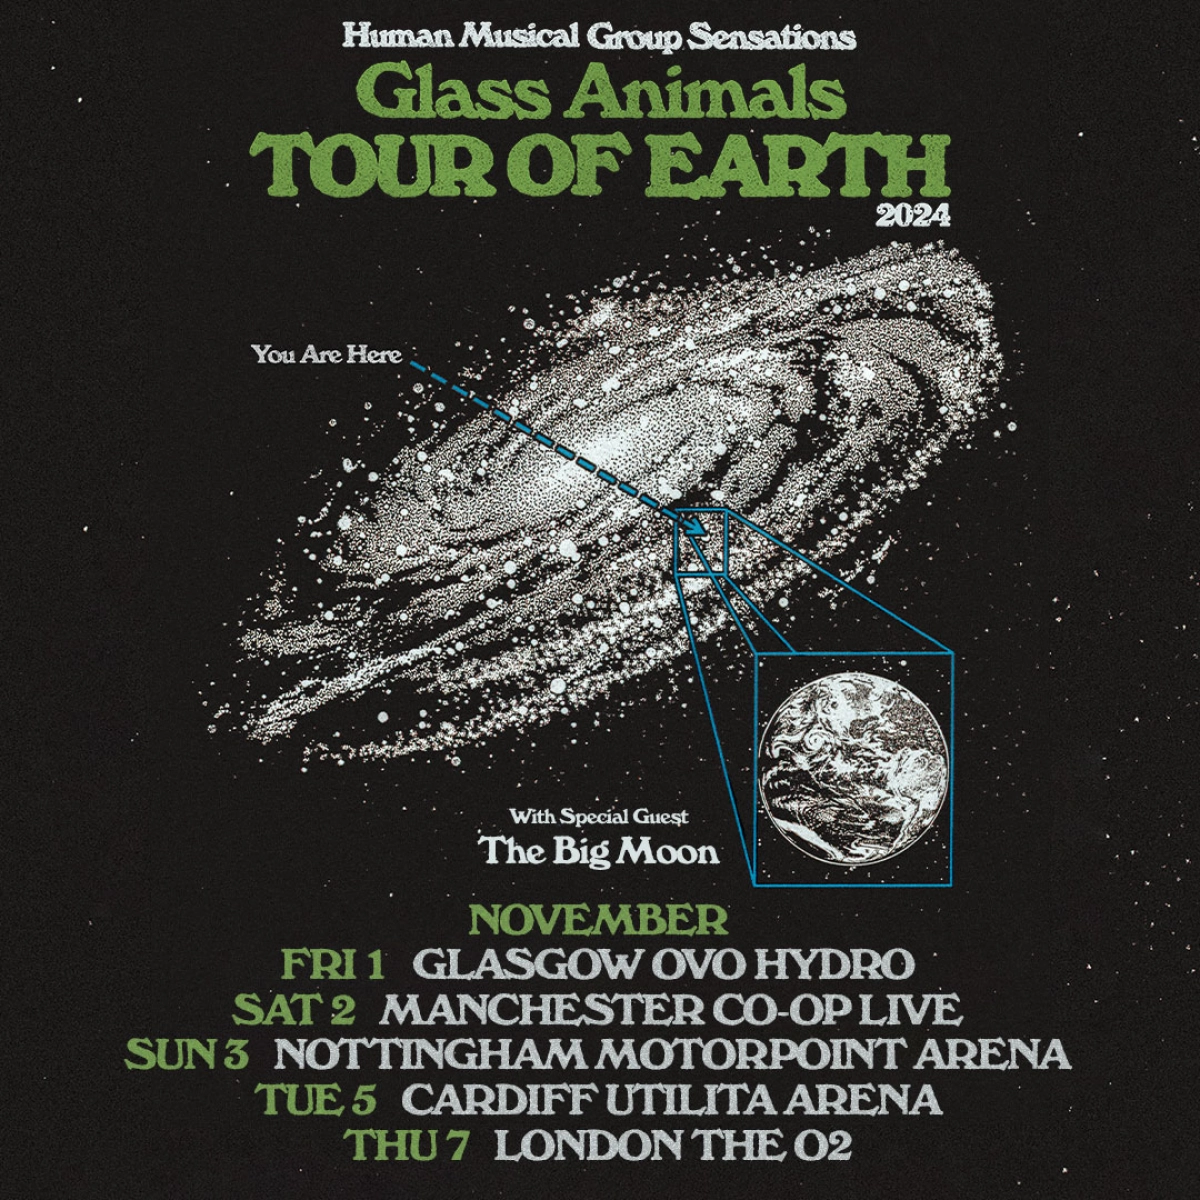 Glass Animals at The O2 Arena Tickets